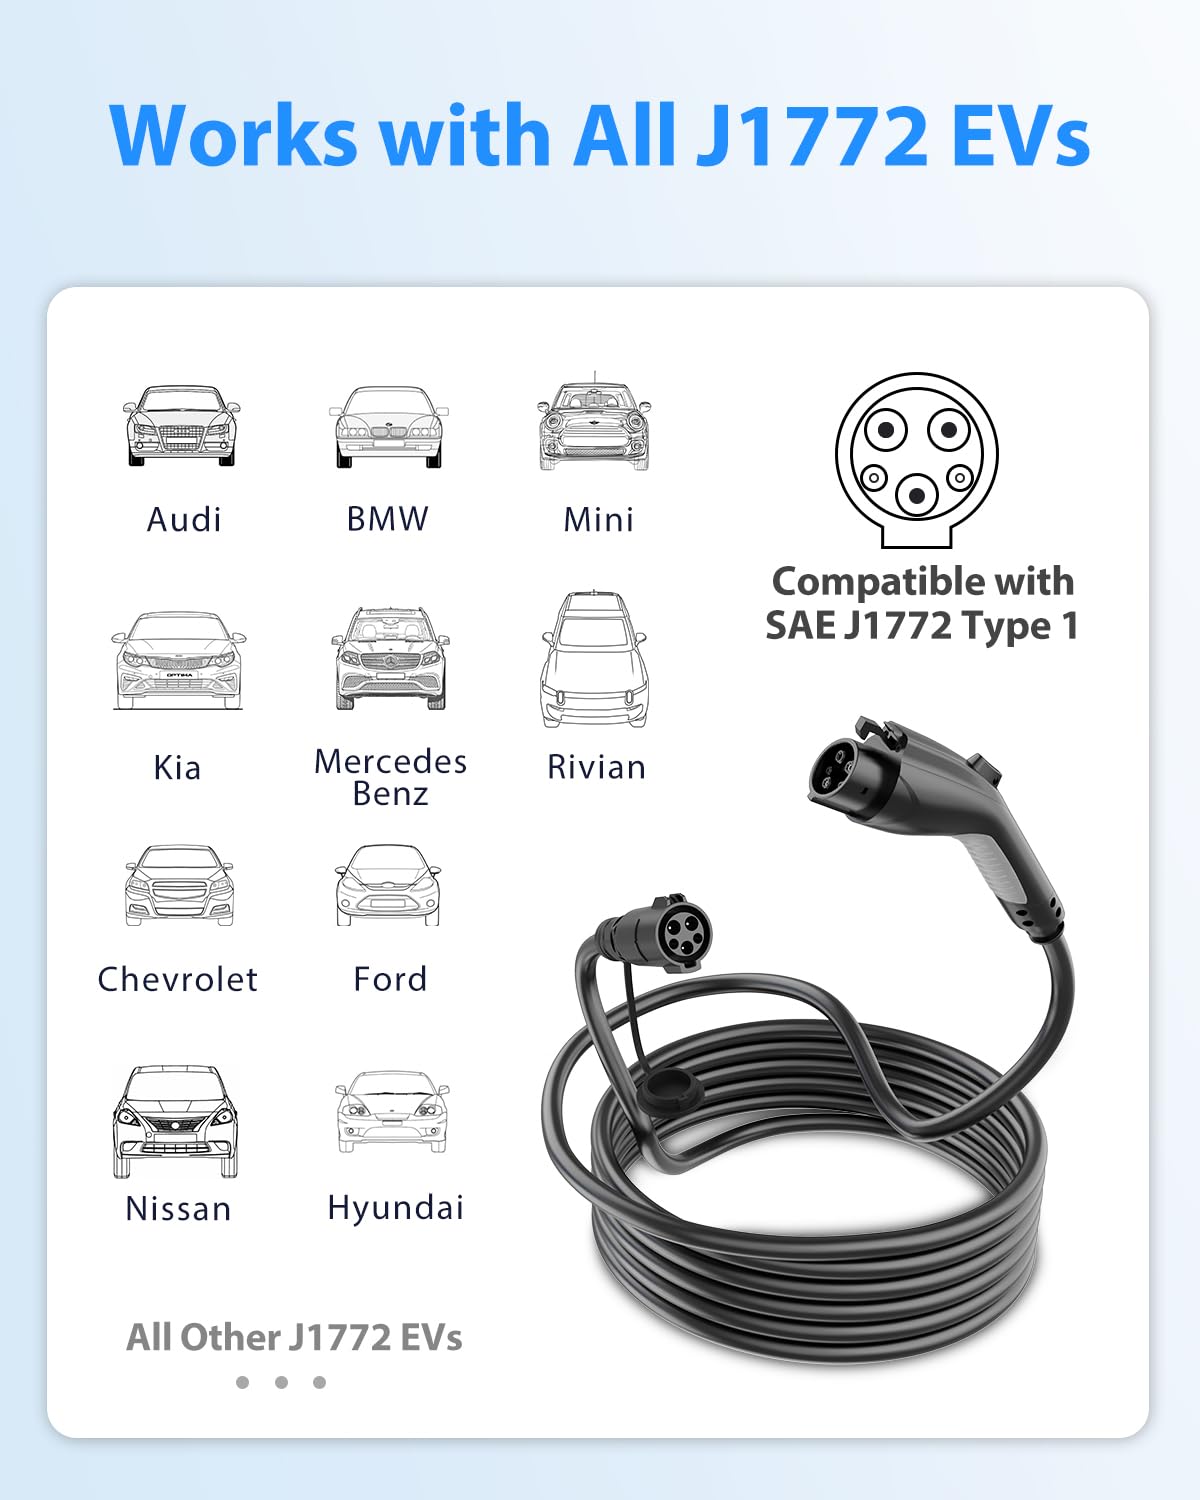 Evse Charger Extension Cord professional Manufacturer-TianQin